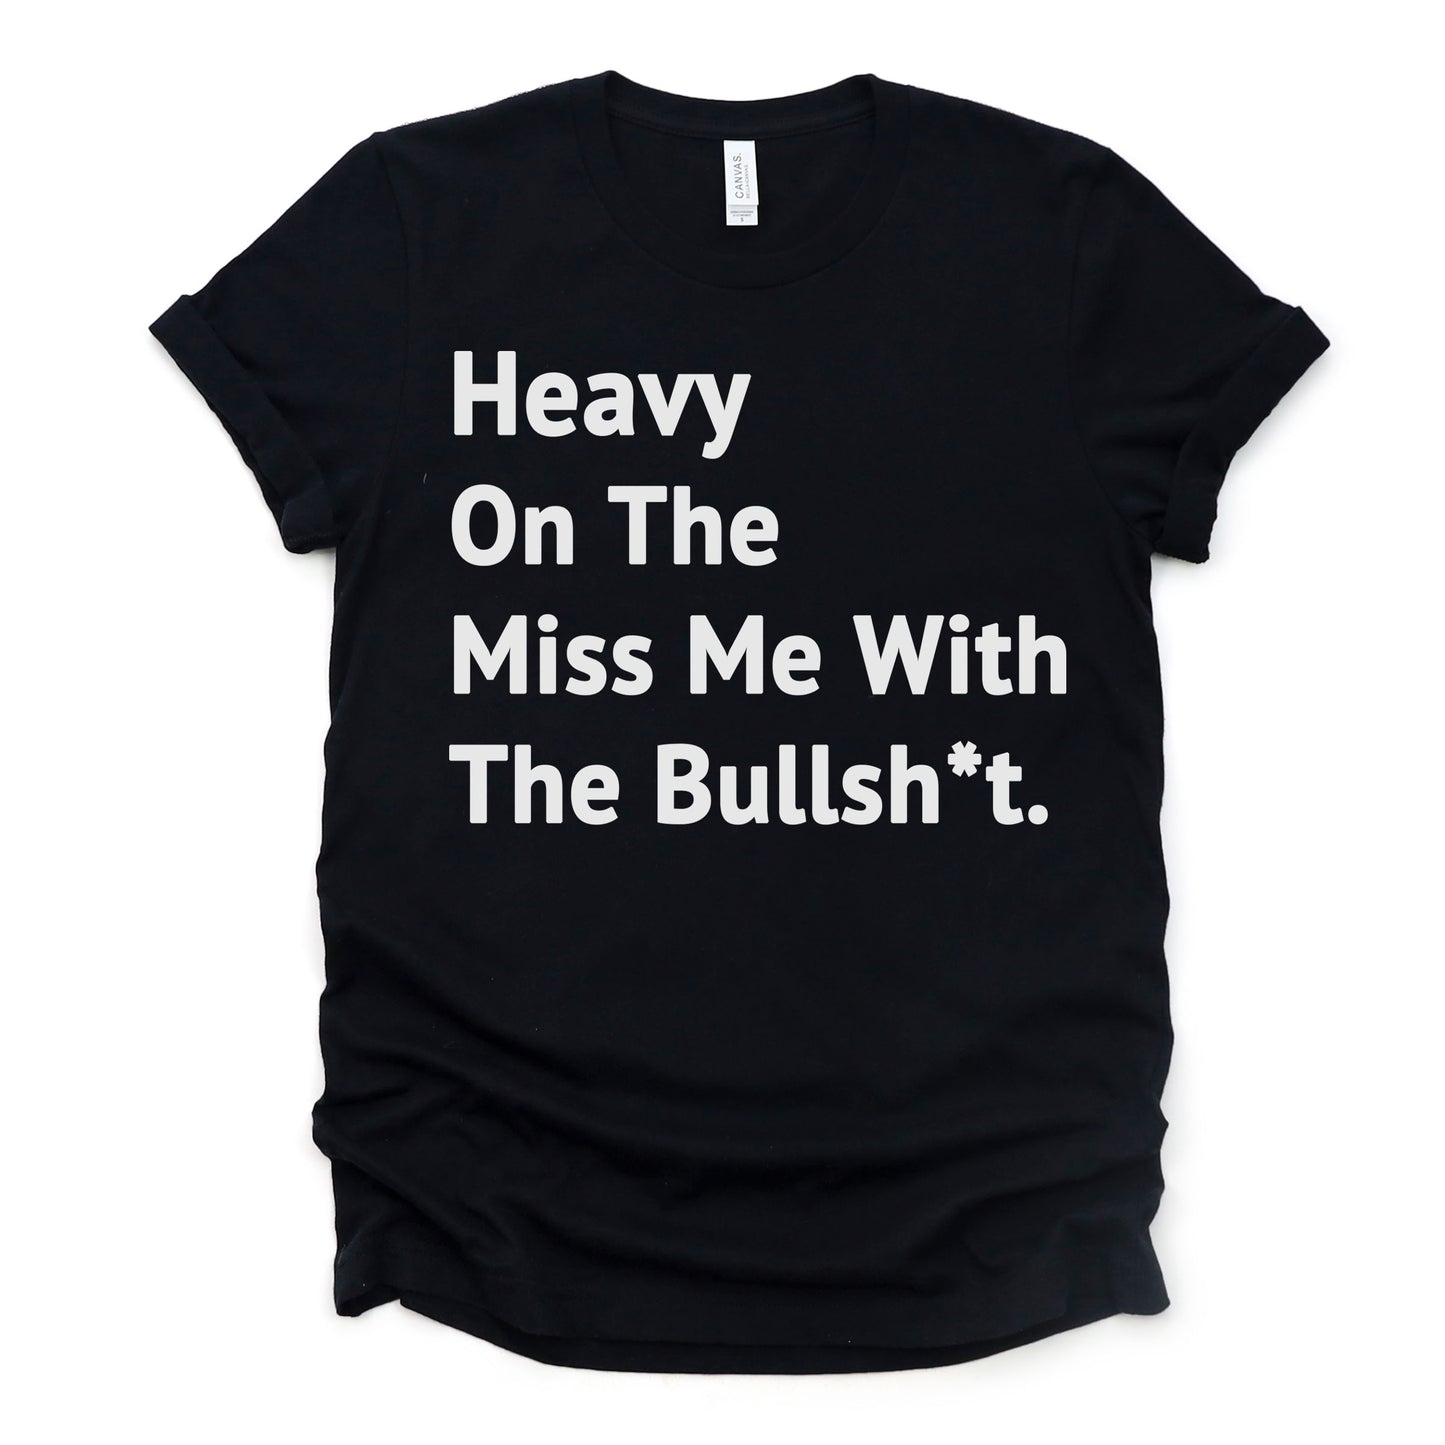 "Heavy On The Miss Me With The Bullsh*t" Tee